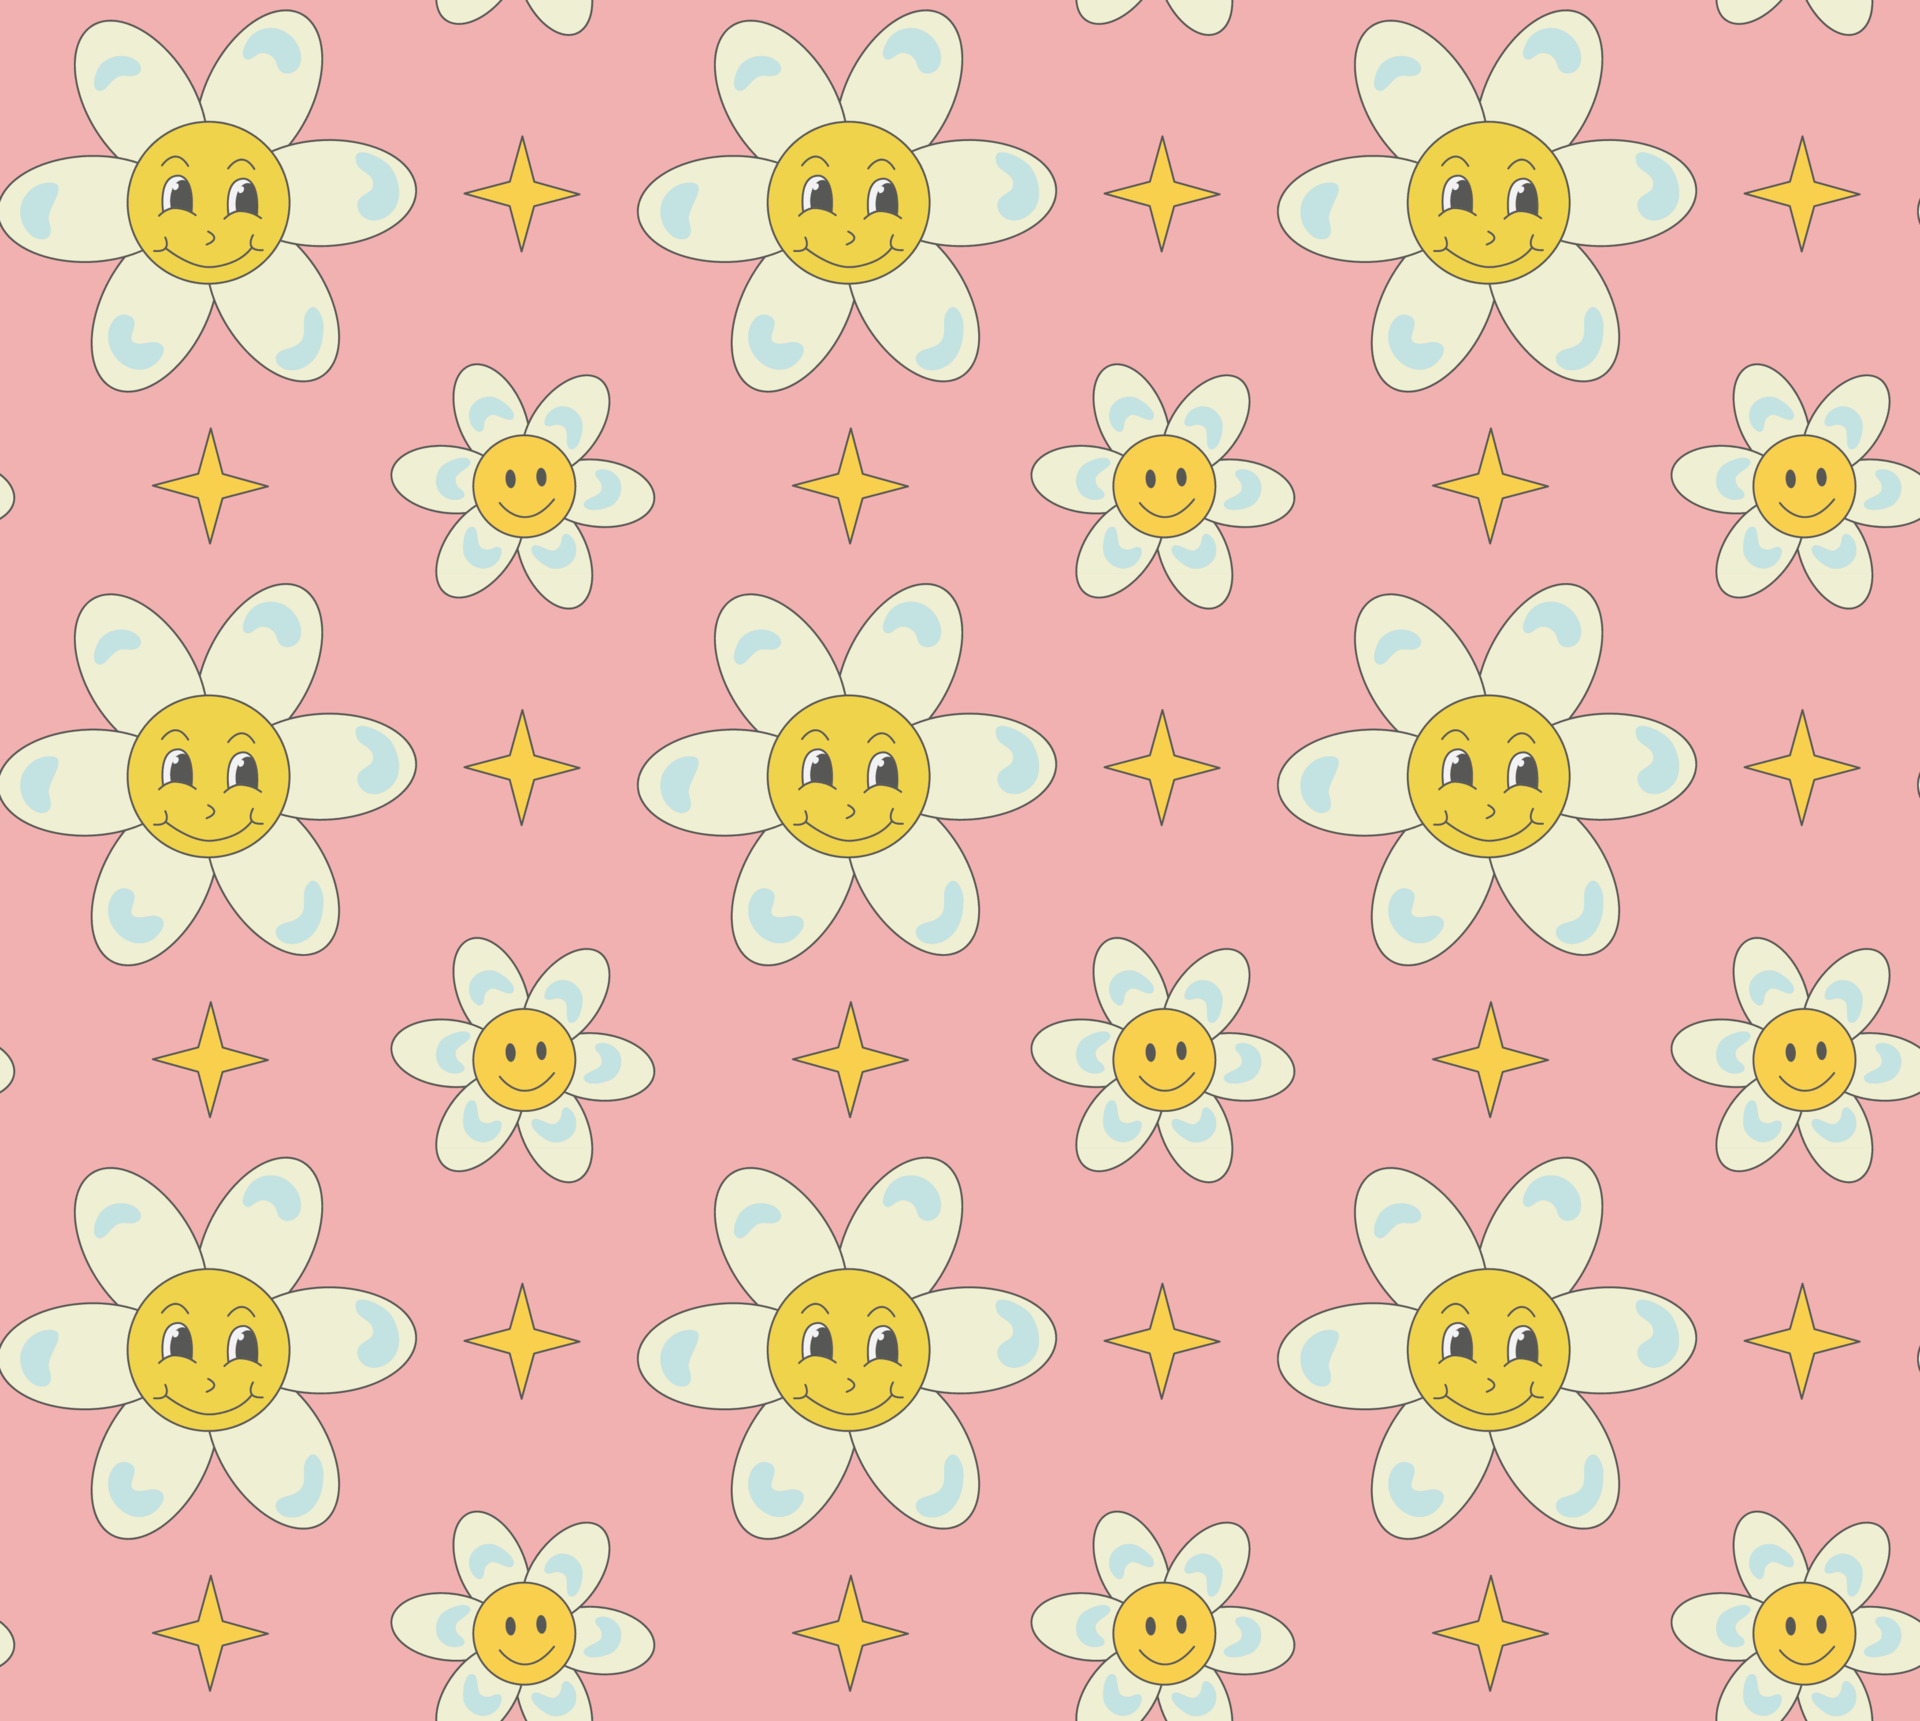 Groovy retro pattern with daisy flower and star in trendy 60s 70